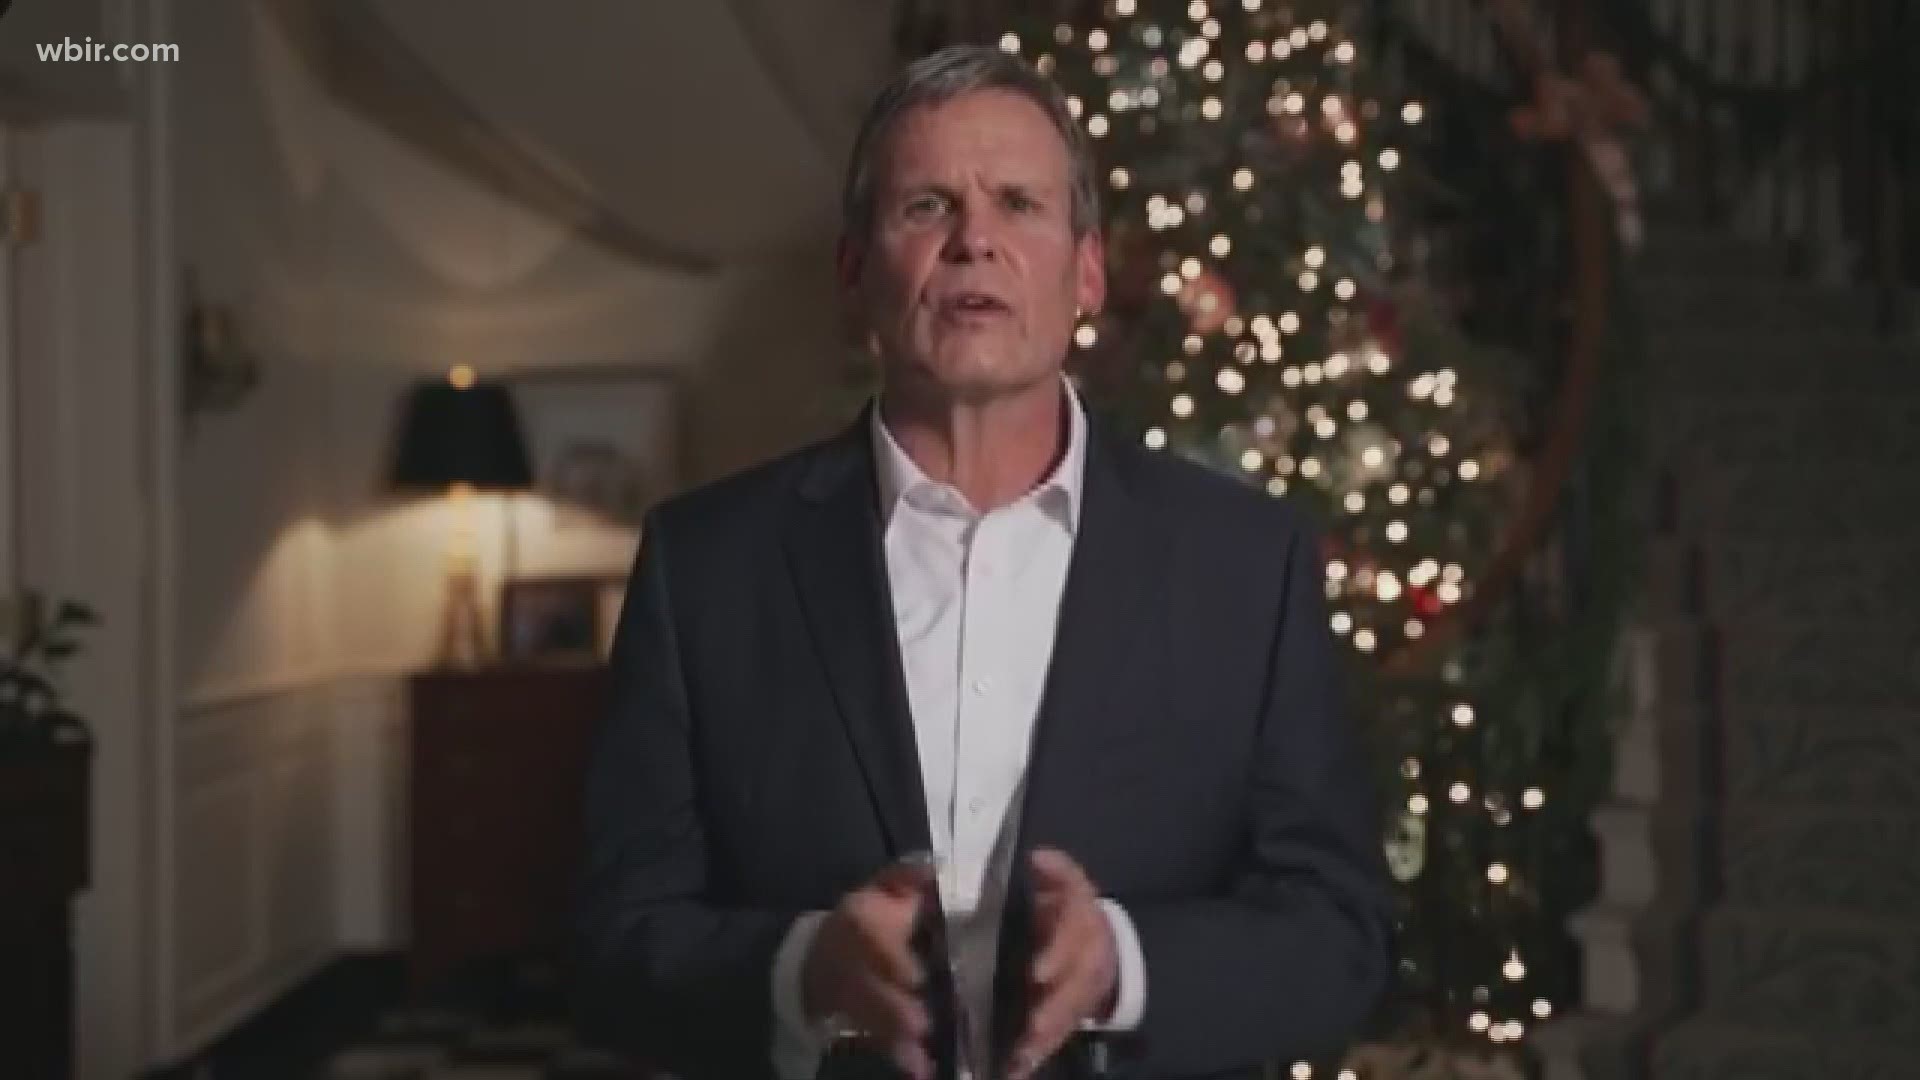 Speaking from COVID-19 quarantine, Governor Bill Lee says Tennesseans need to make hard choices this Christmas.